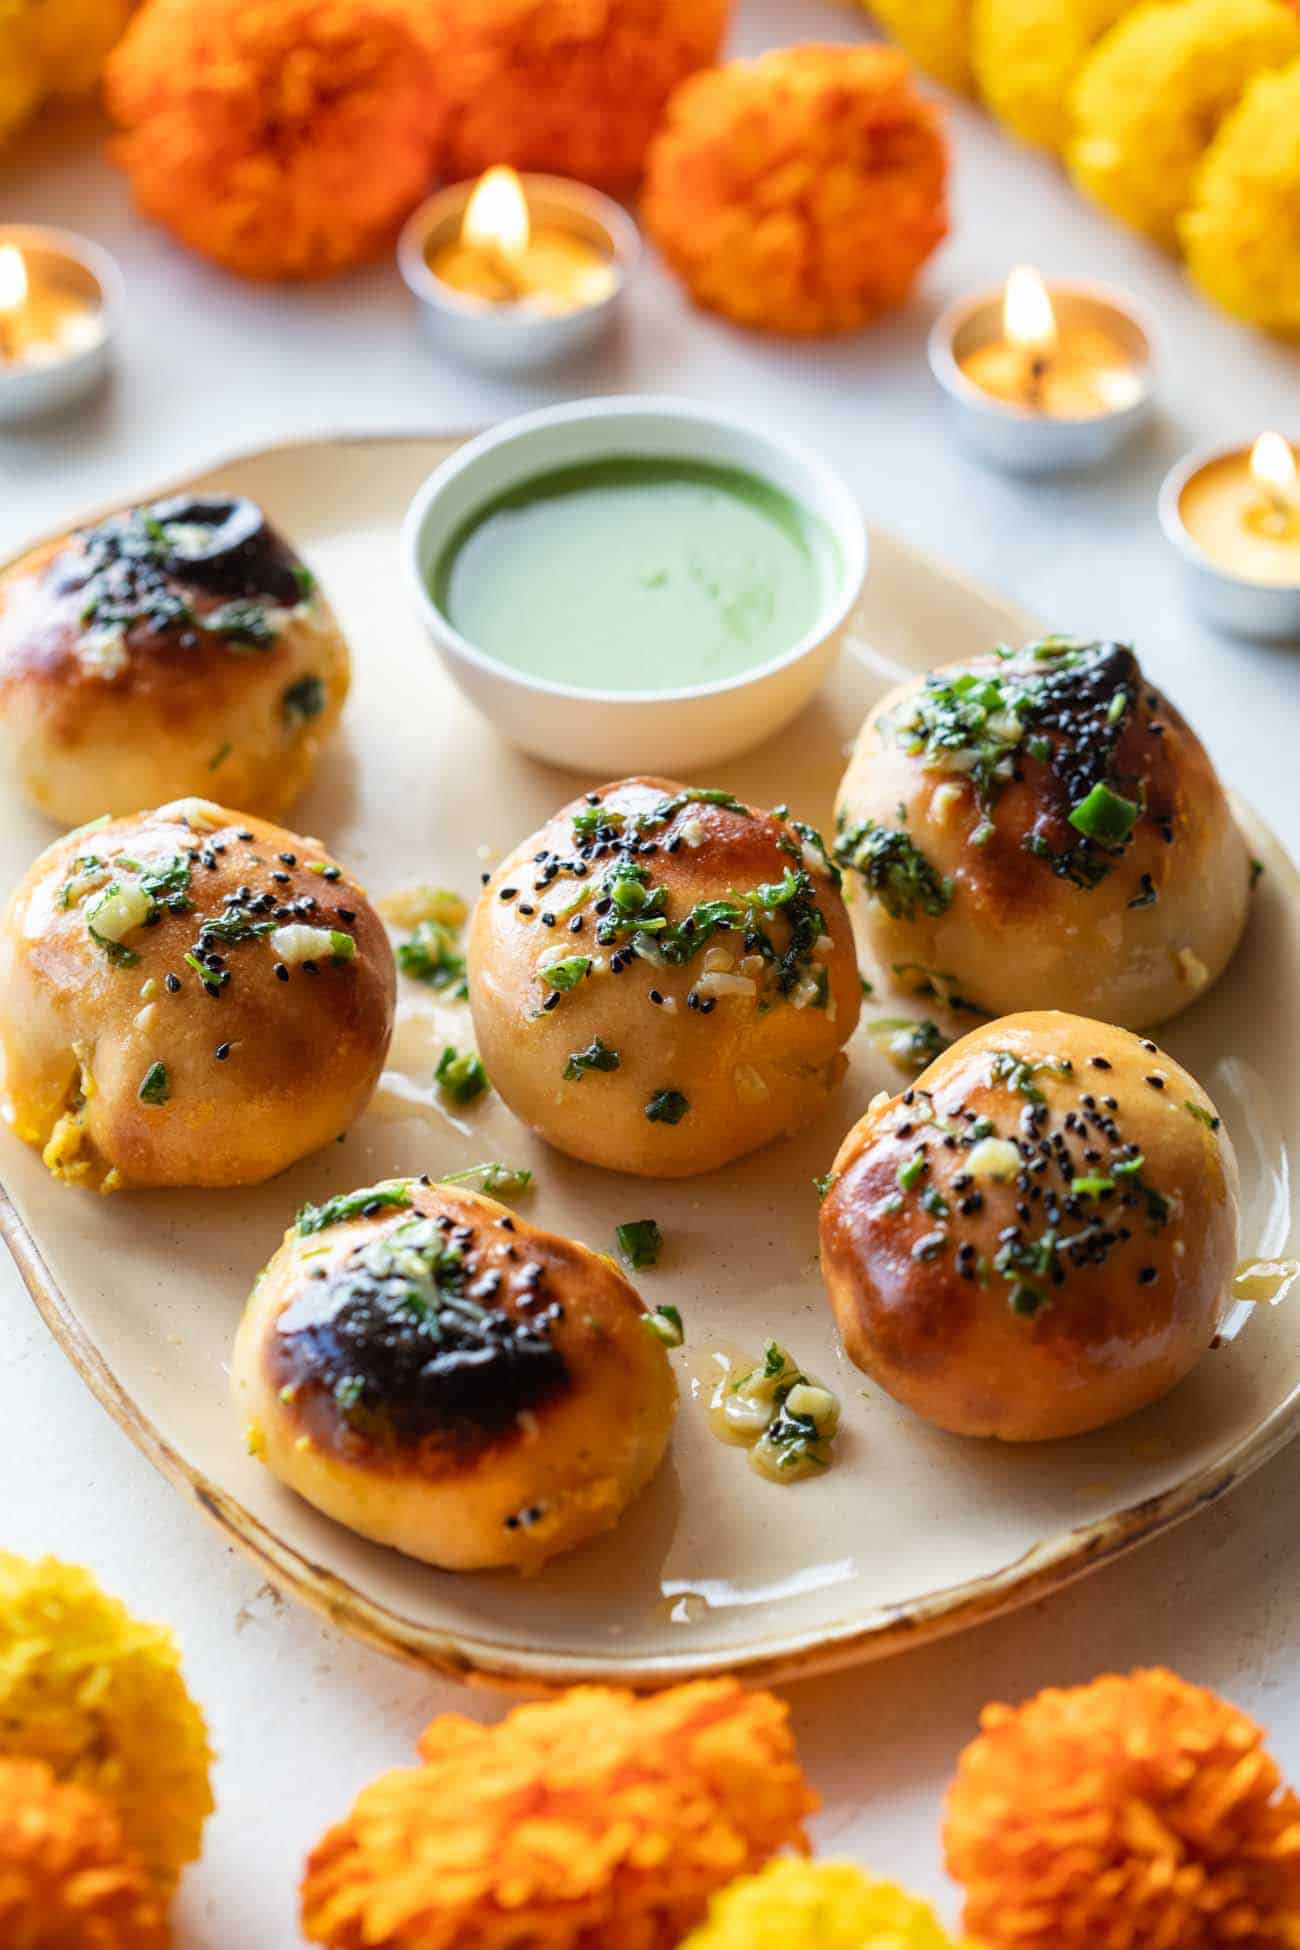 Naan bombs served on a platter with mint chutney and marigold flowers strewn about